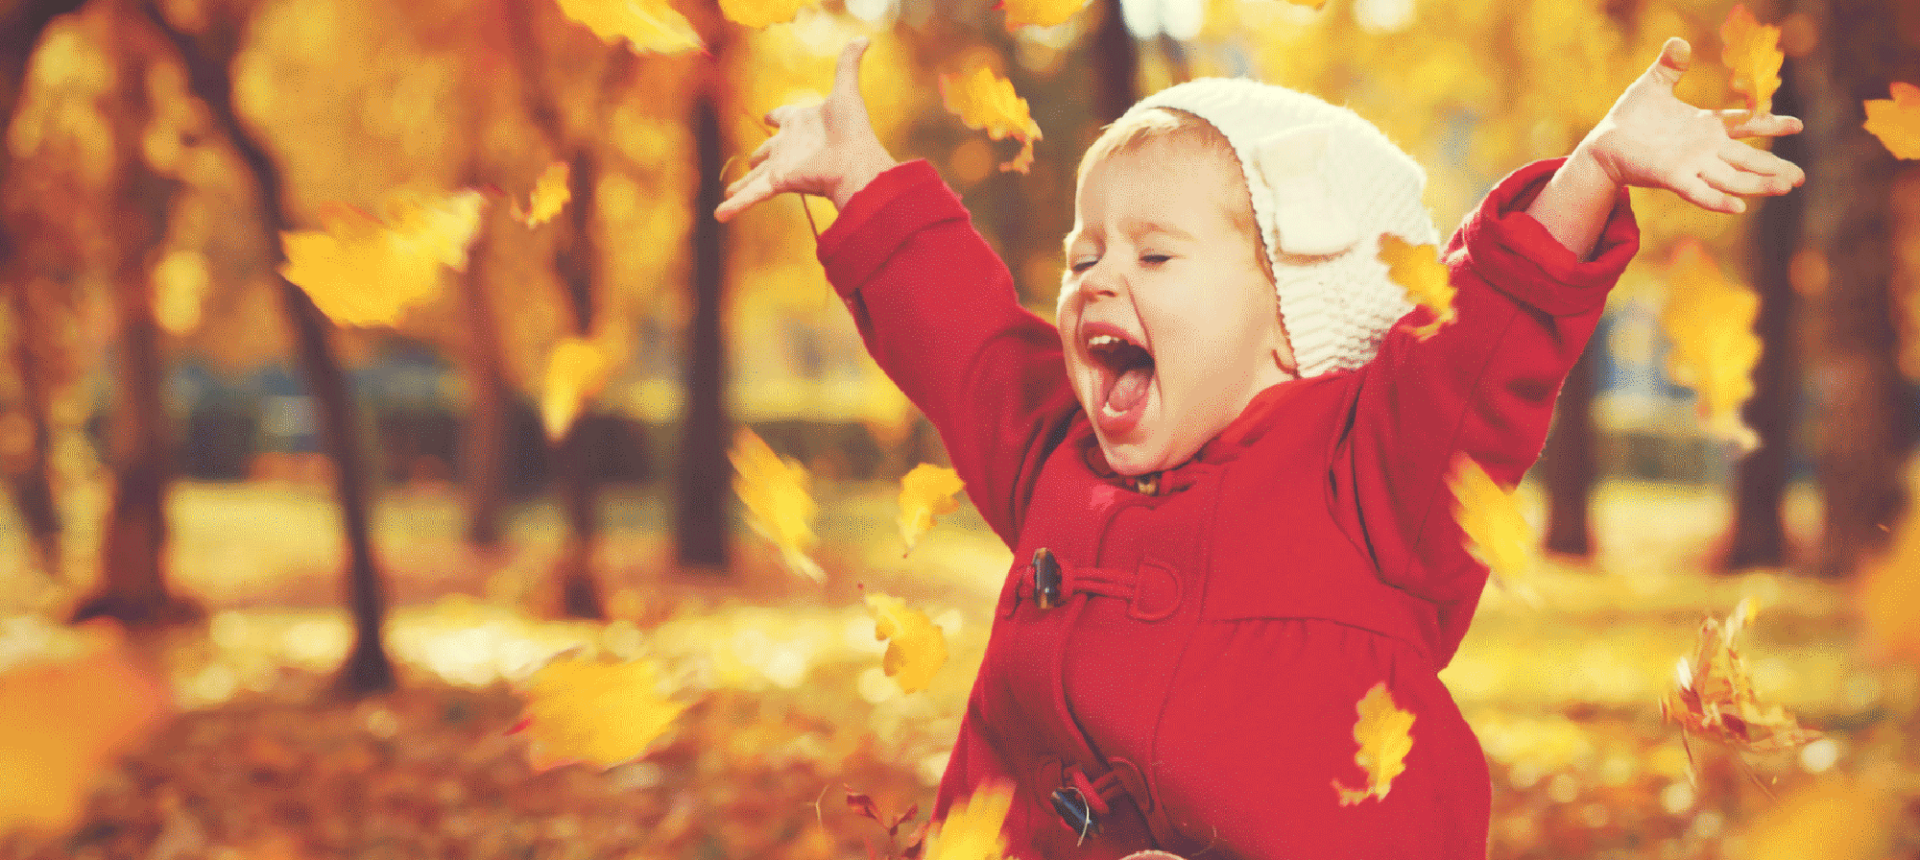 a small baby in a red jacket sitting in the grass playing with the falling leaves